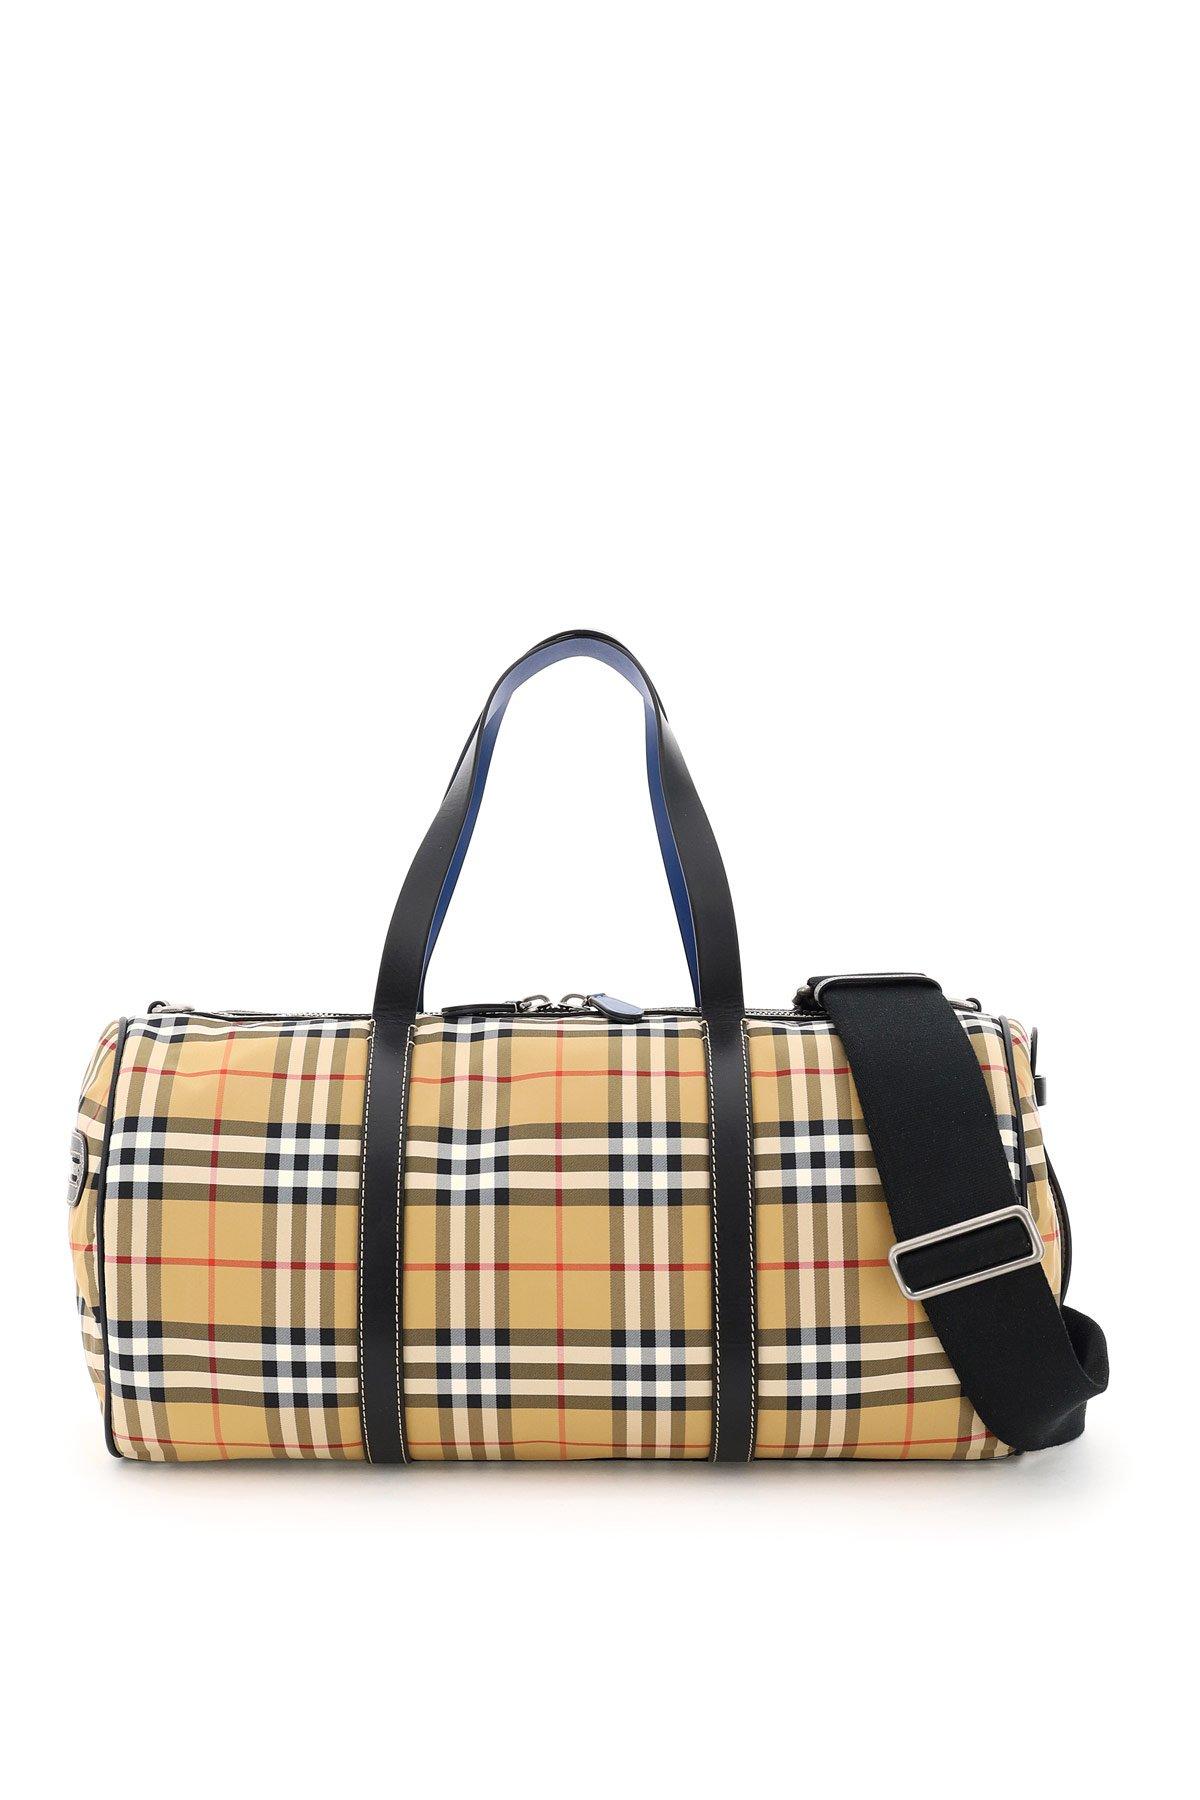 Burberry Large Kennedy Duffle Bag for Men